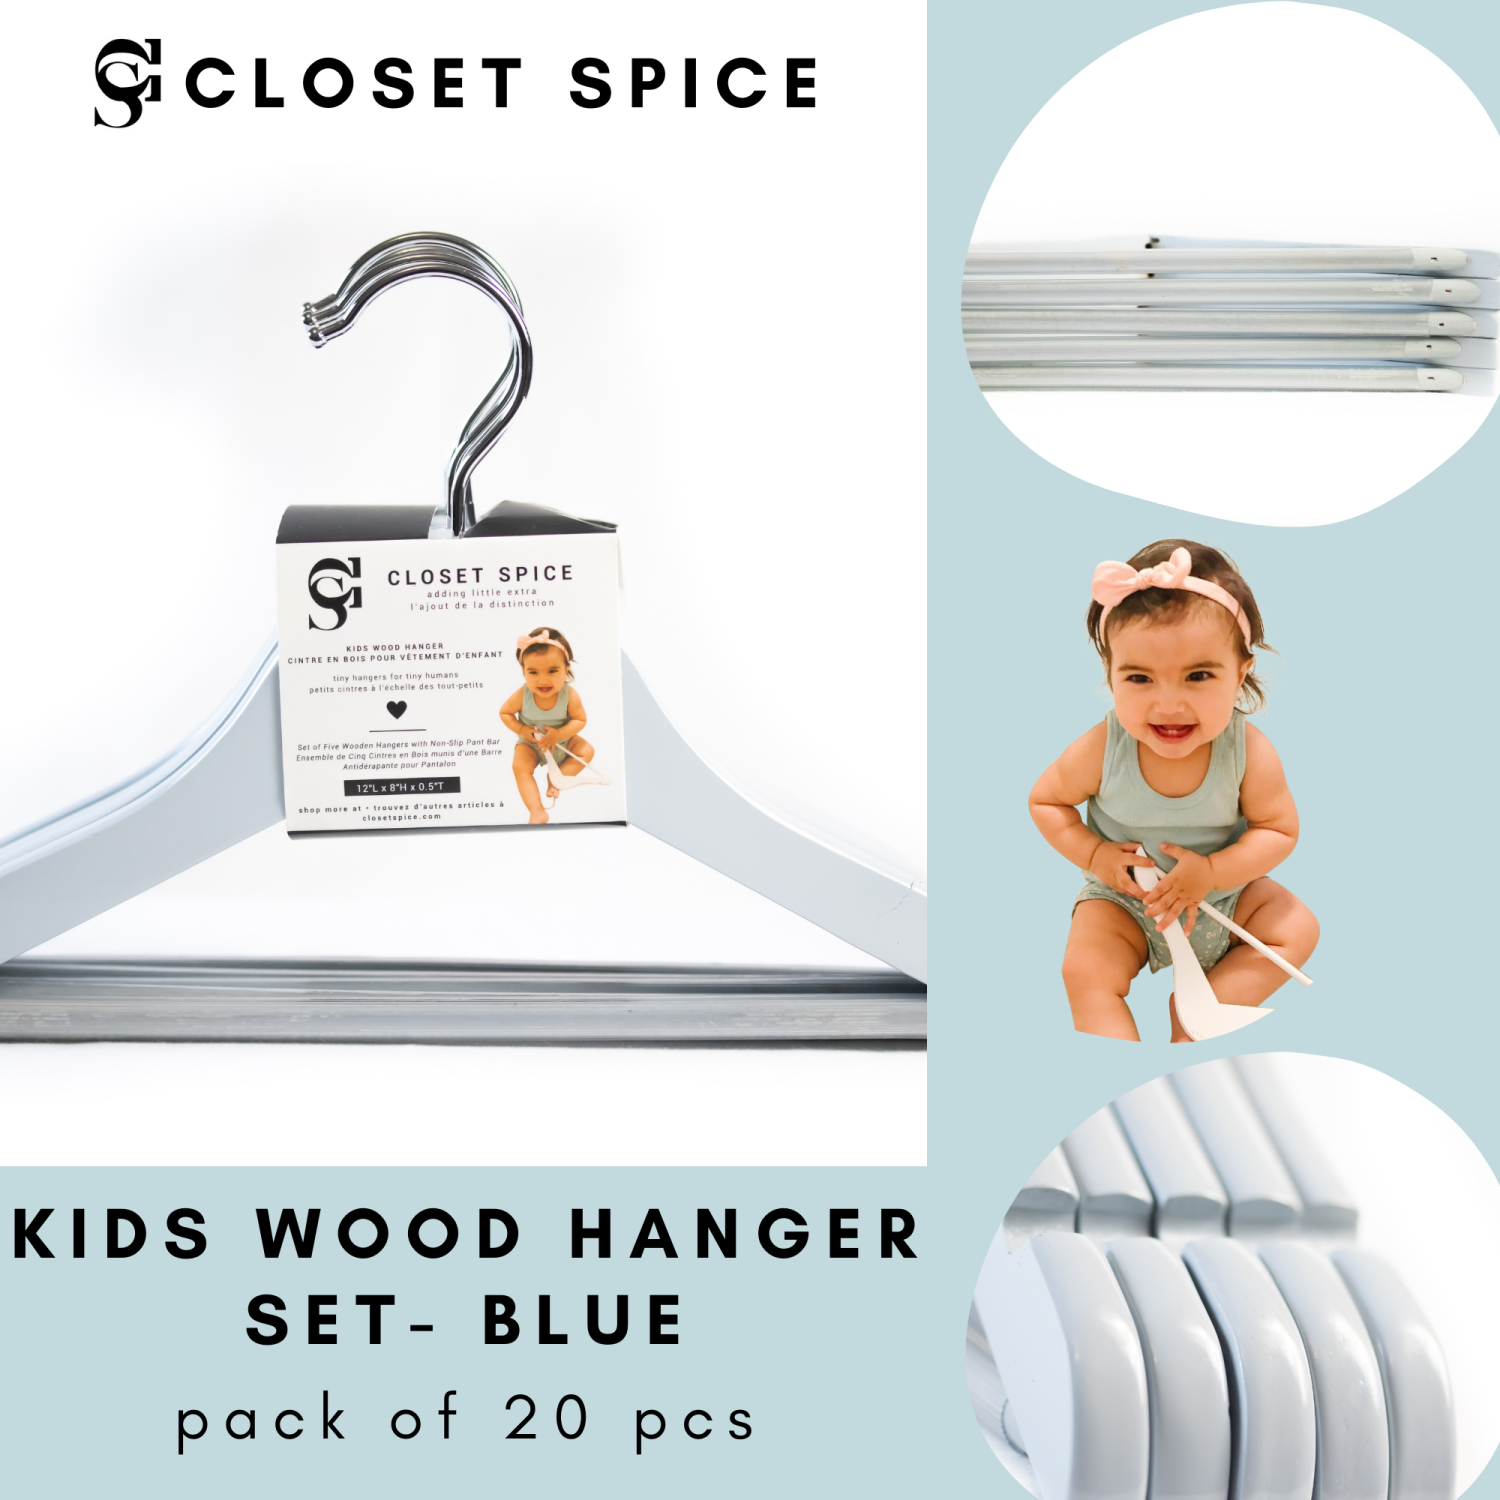 Closet Spice - 20 pk (Blue) Solid Wood Children's Hangers Smooth Finish,  360 Anti Rust Swivel Hook, Sturdy & Durable Kids Wooden Hangers w/ Notches,  Colourful & Warming Nursery Toddler Wood Hanger |